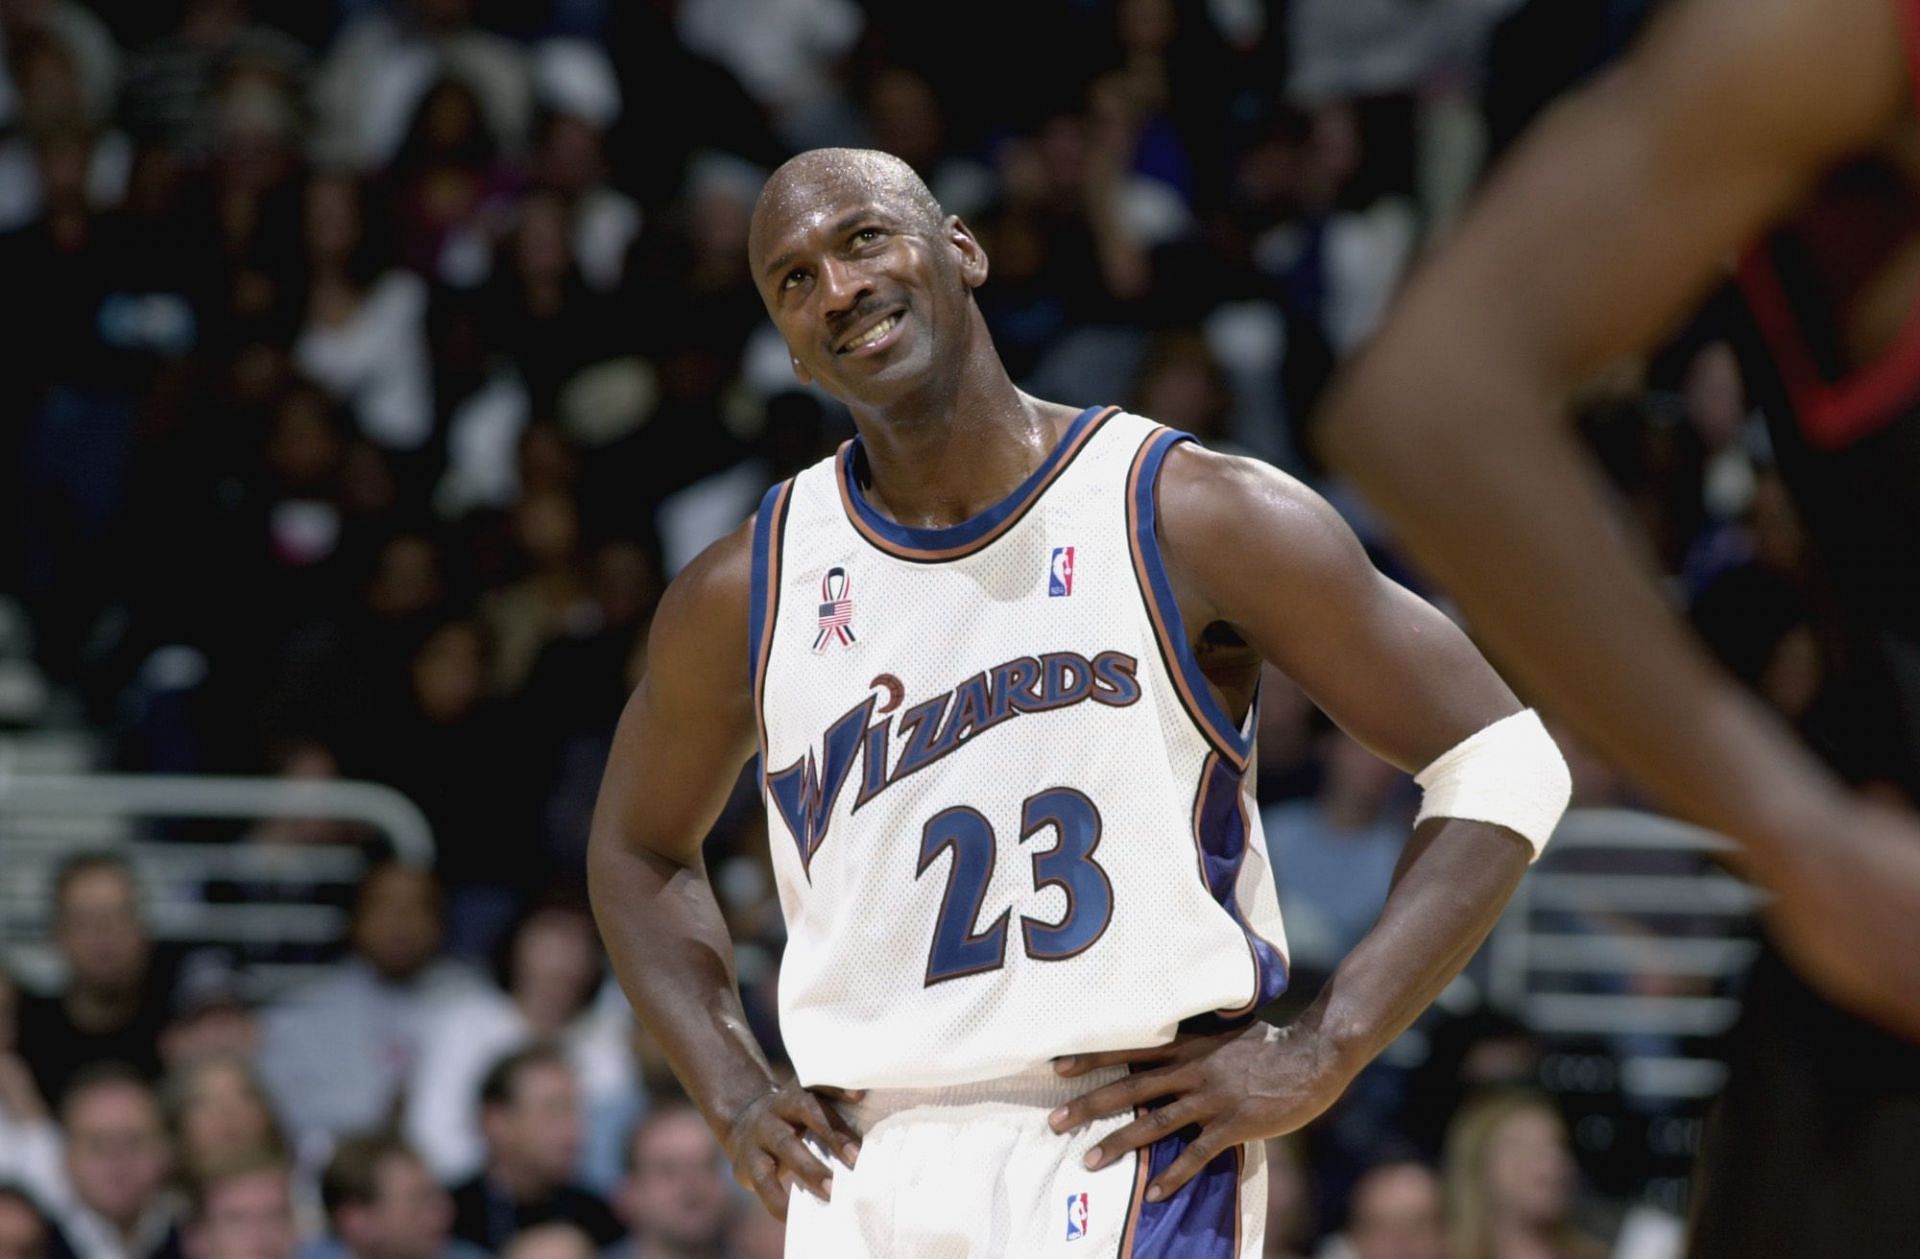 Watch: 38-year-old Michael has 51-point game for Washington Wizards, 20 years ago on this